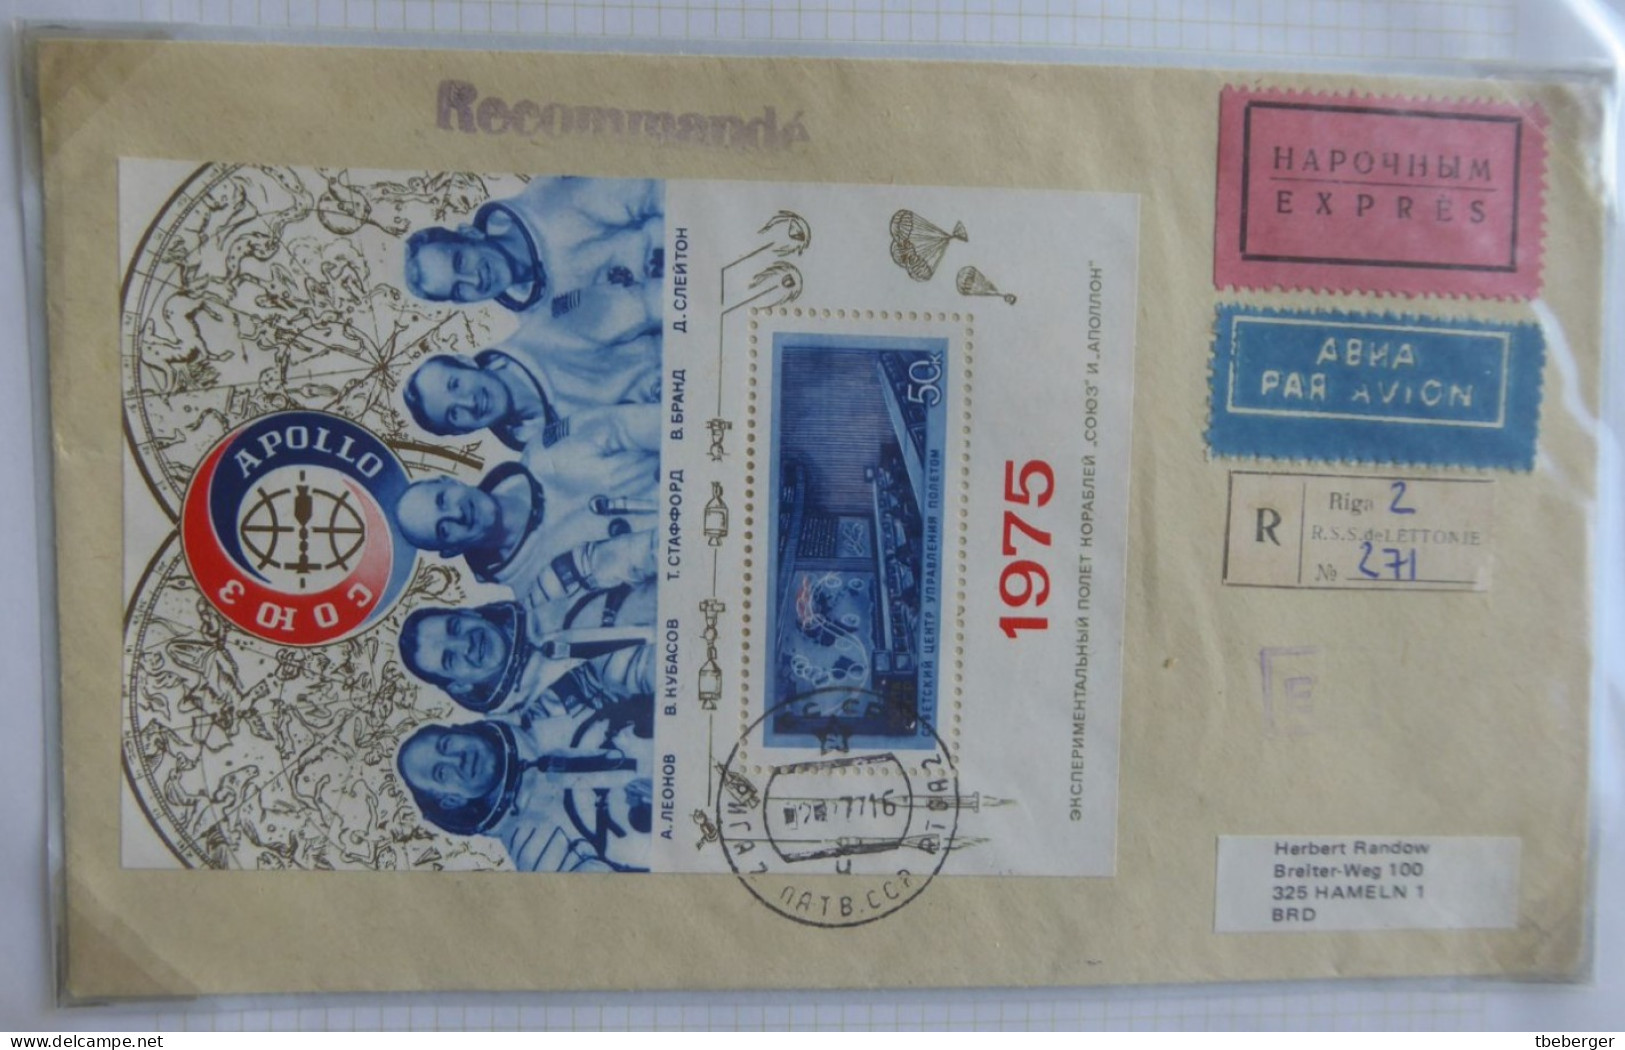 Russia USSR 1947-92 Special Post Express Mail, 15 covers with different labels, cds's & frankings ex collection Miskin